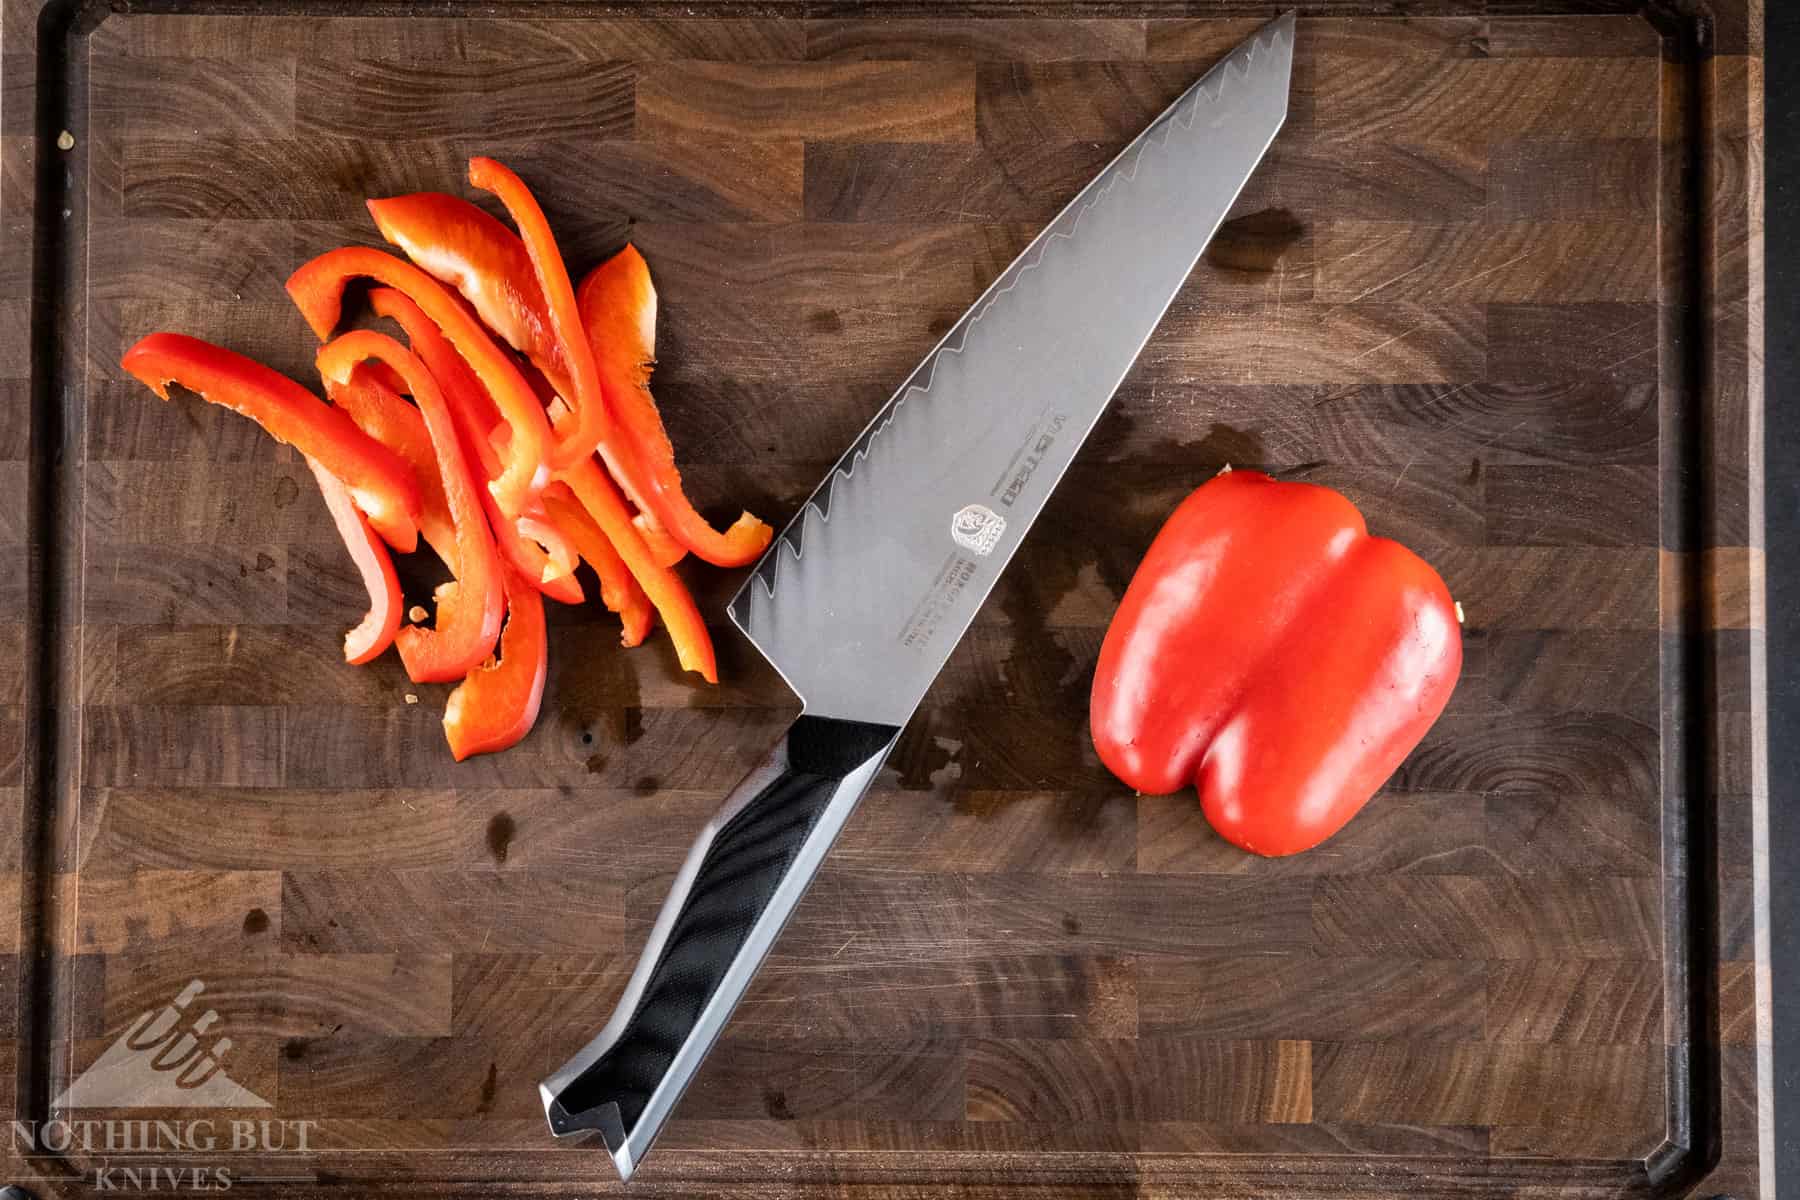 The Vosteed Morgan chef knife made short work of the bell pepper. 